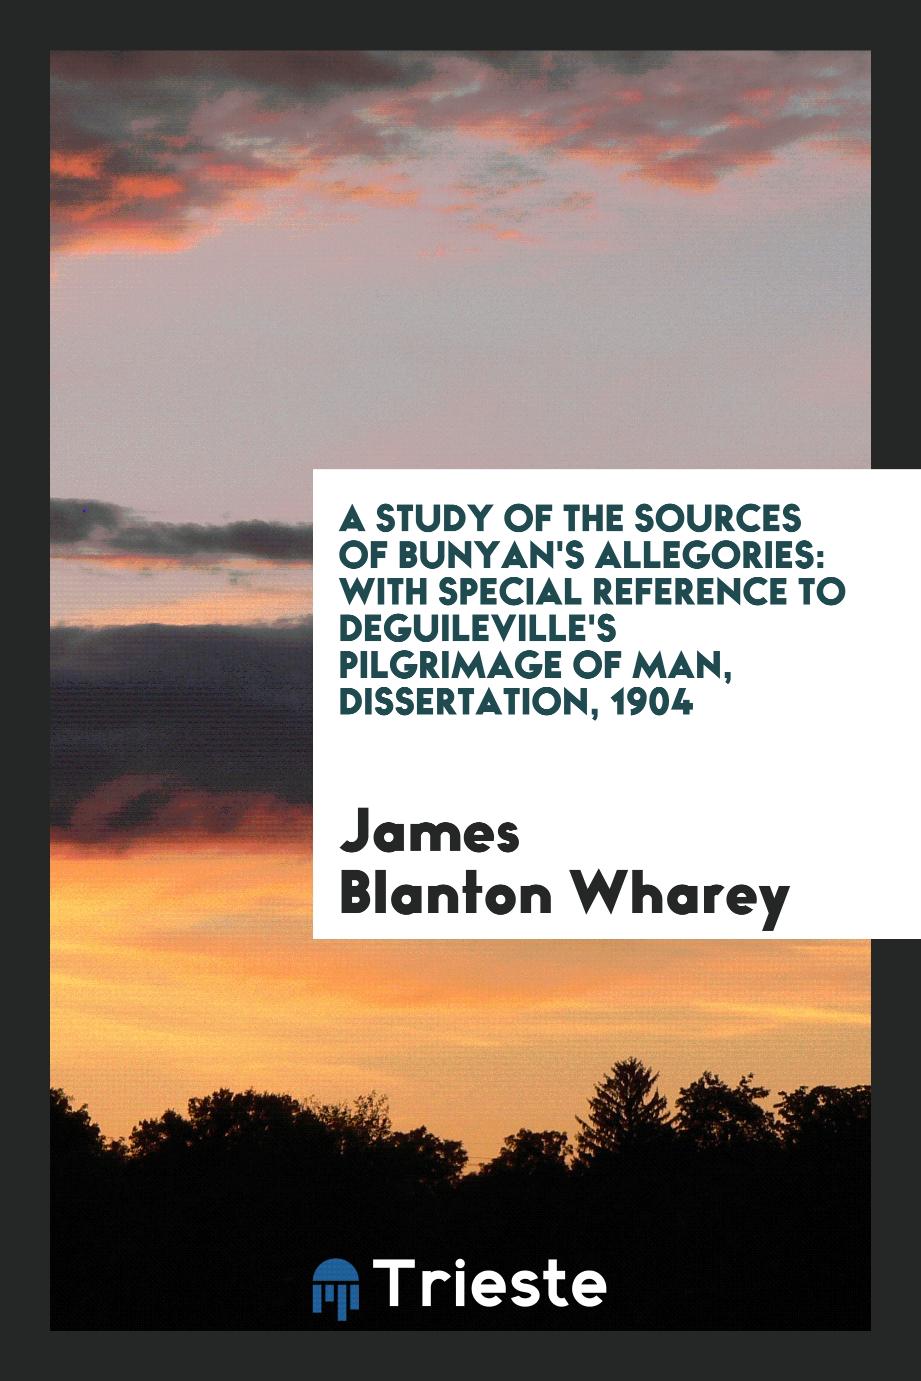 A Study of the Sources of Bunyan's Allegories: With Special Reference to Deguileville's Pilgrimage of Man, Dissertation, 1904